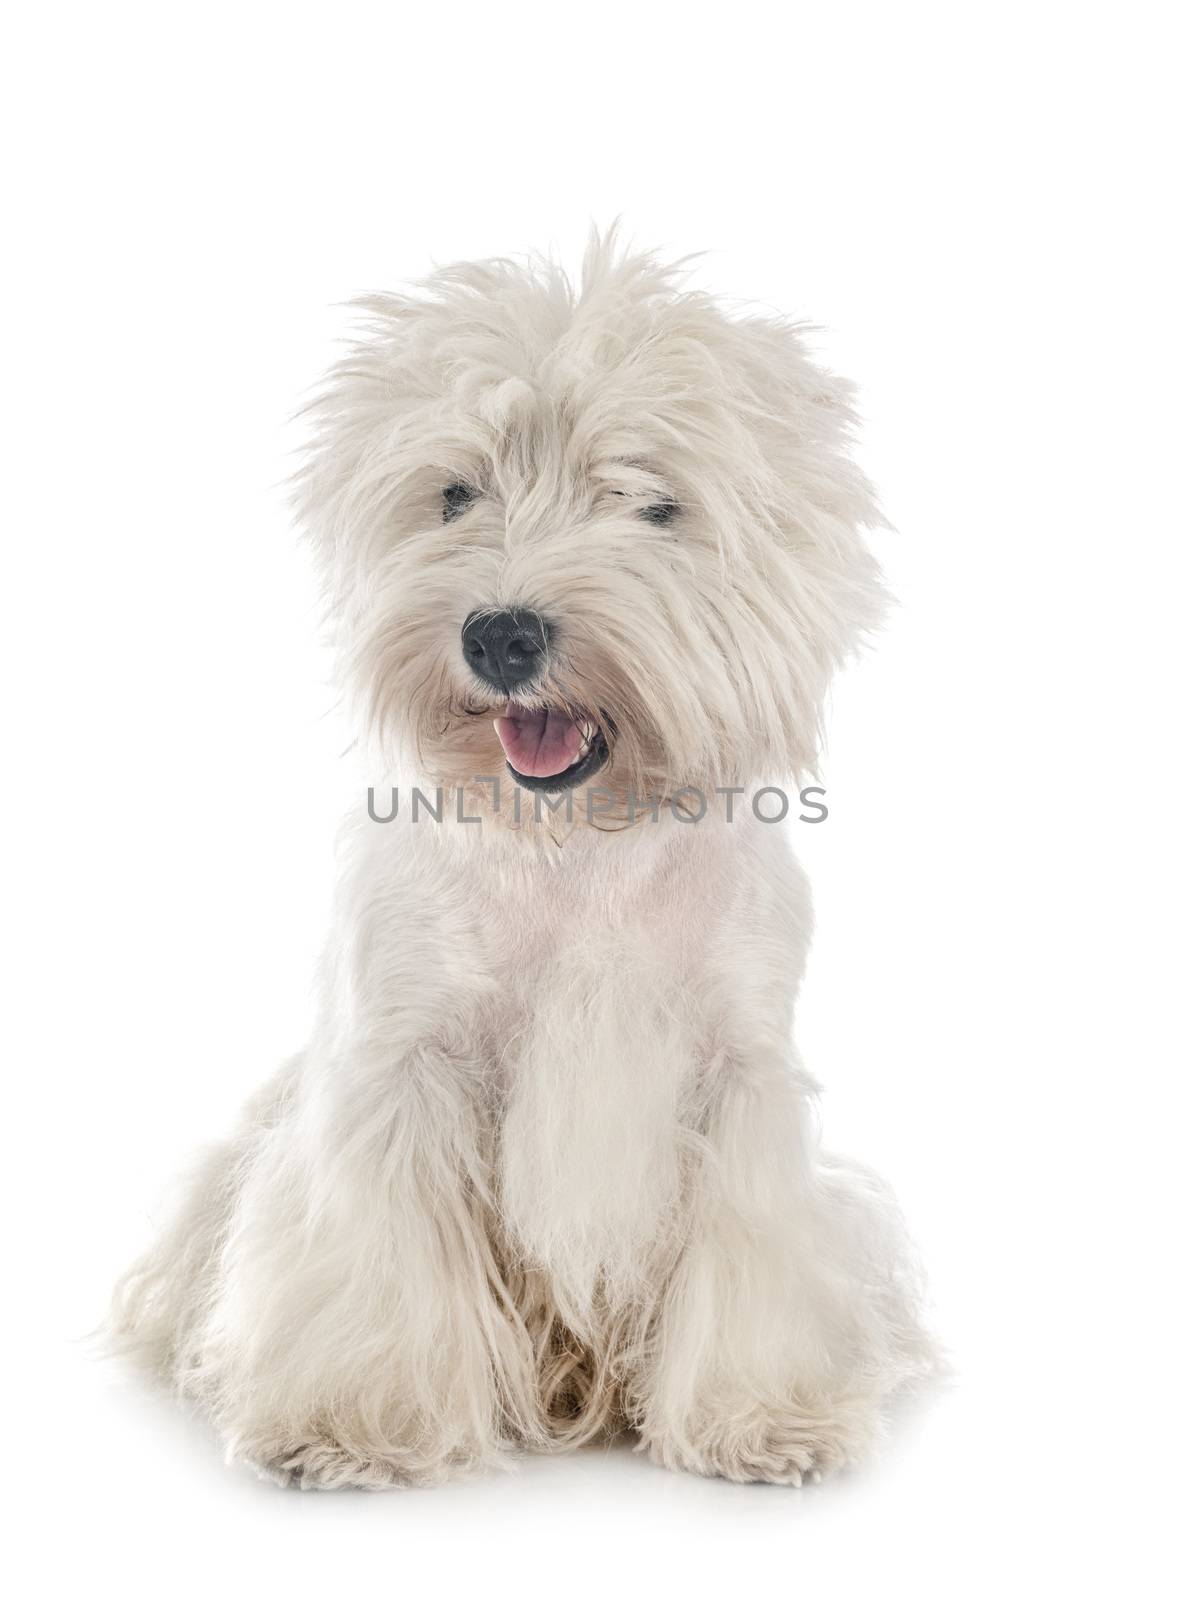 West Highland White Terrier in front of white background